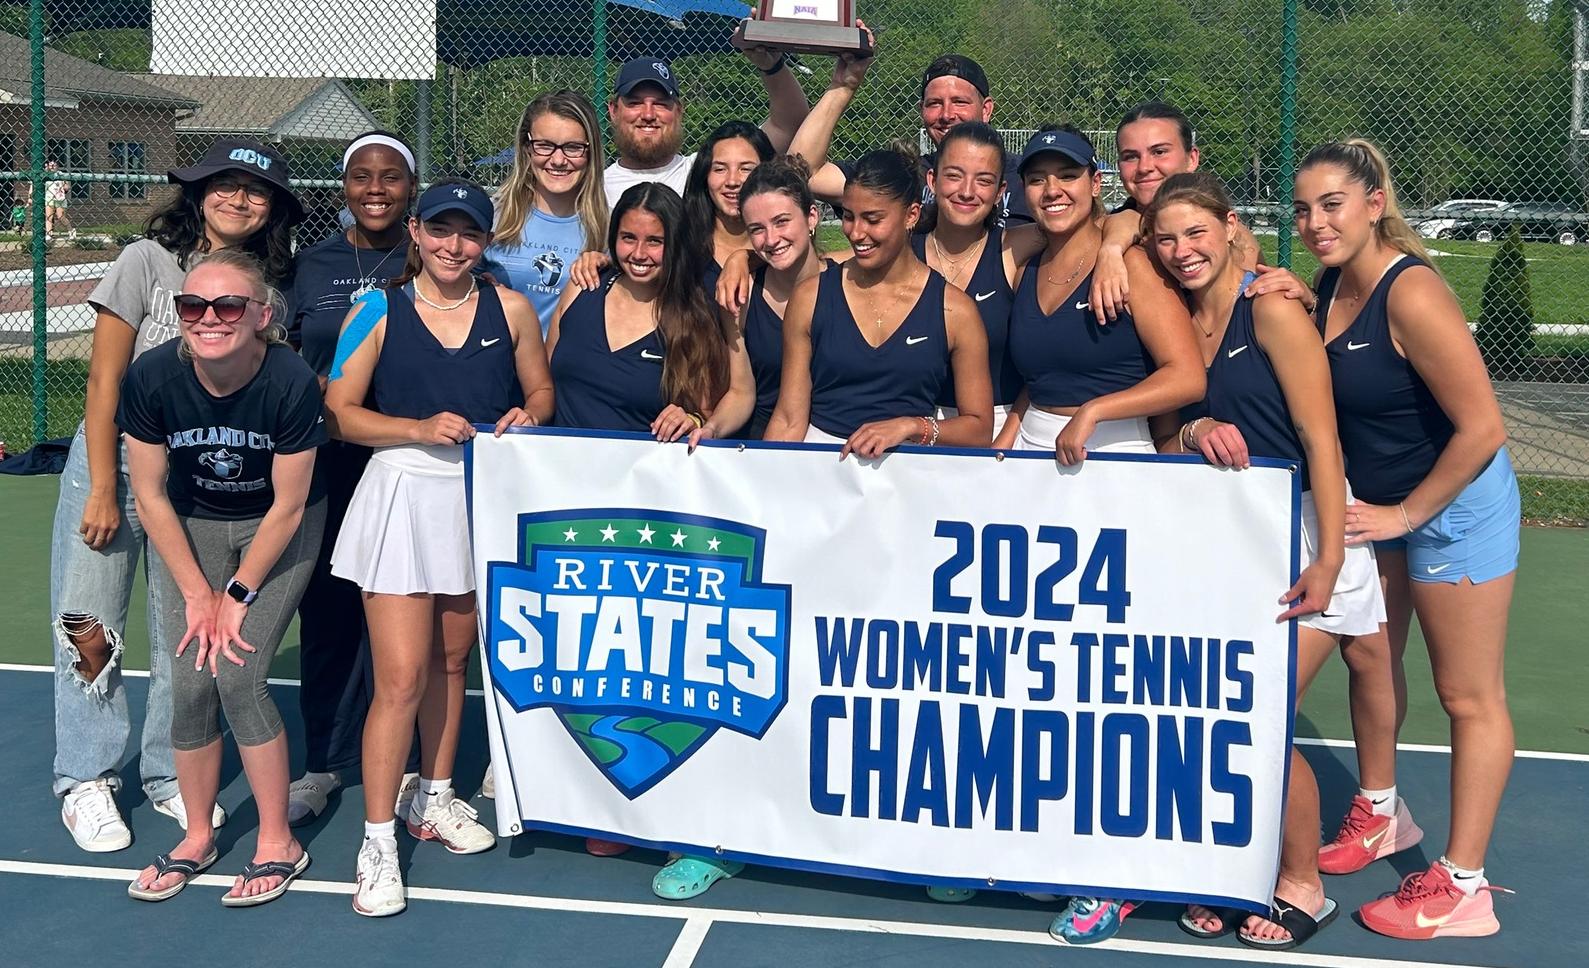 Oakland City Women's Tennis Repeats as River States Champions